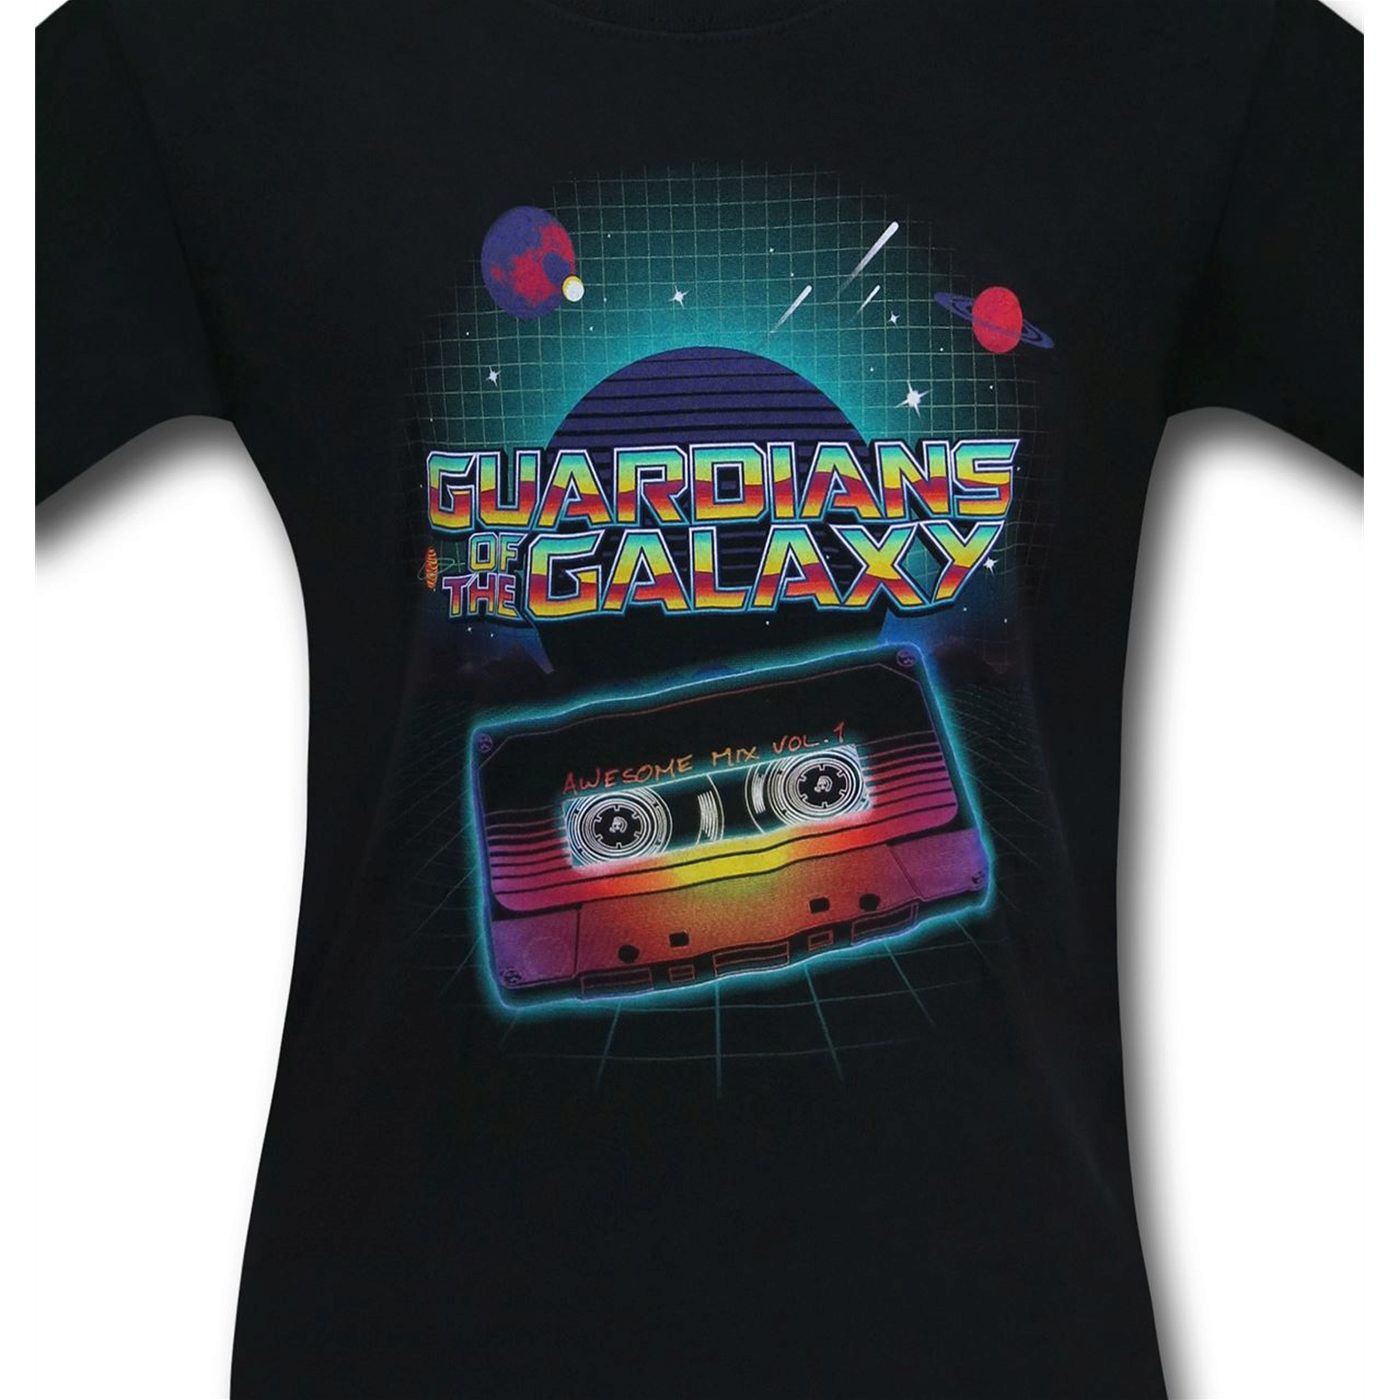 GOTG Awesome Mix Tape Men's T-Shirt